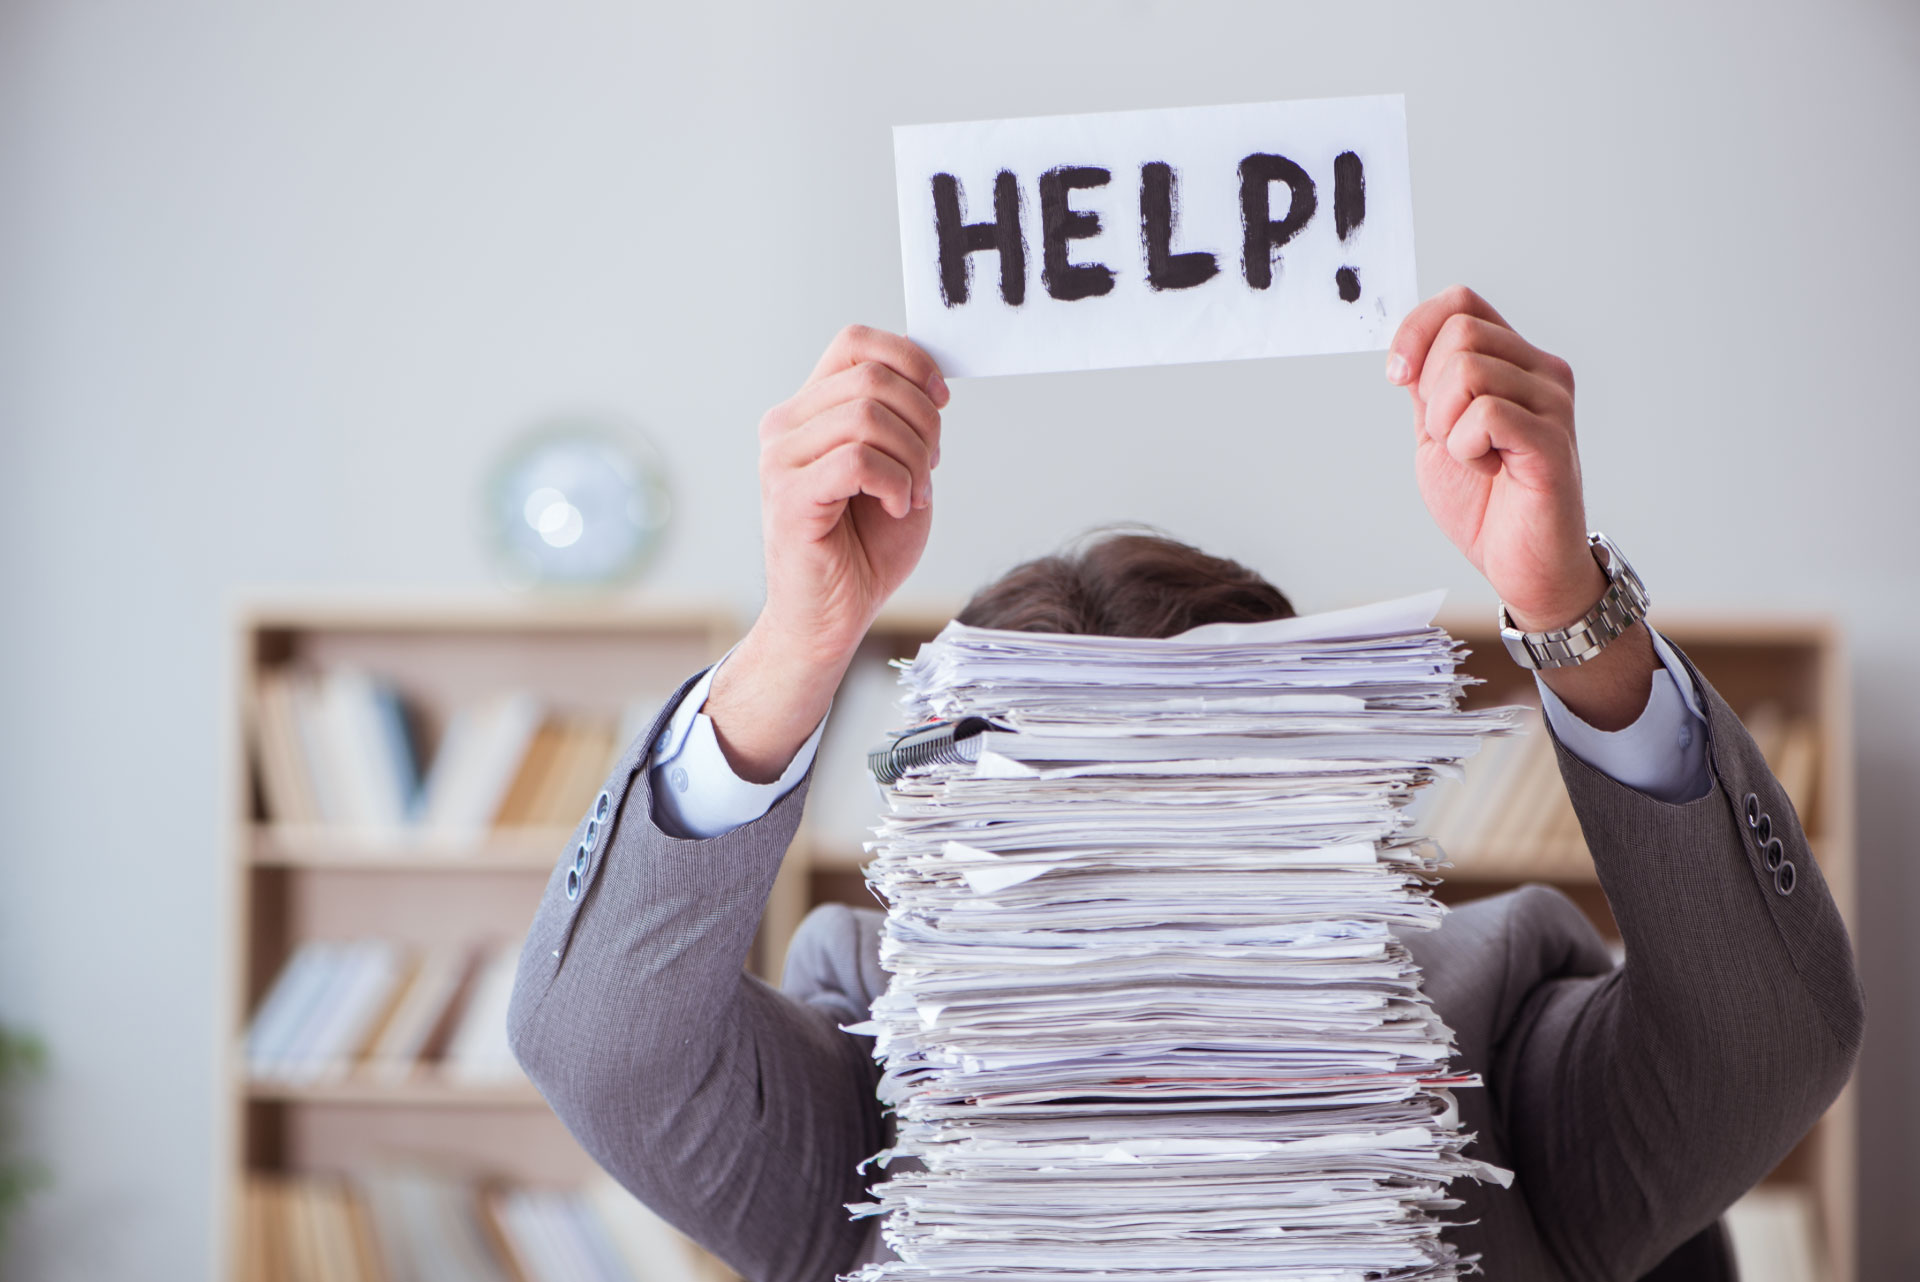 Image of a stack of office papers with a person behind holding a help sign